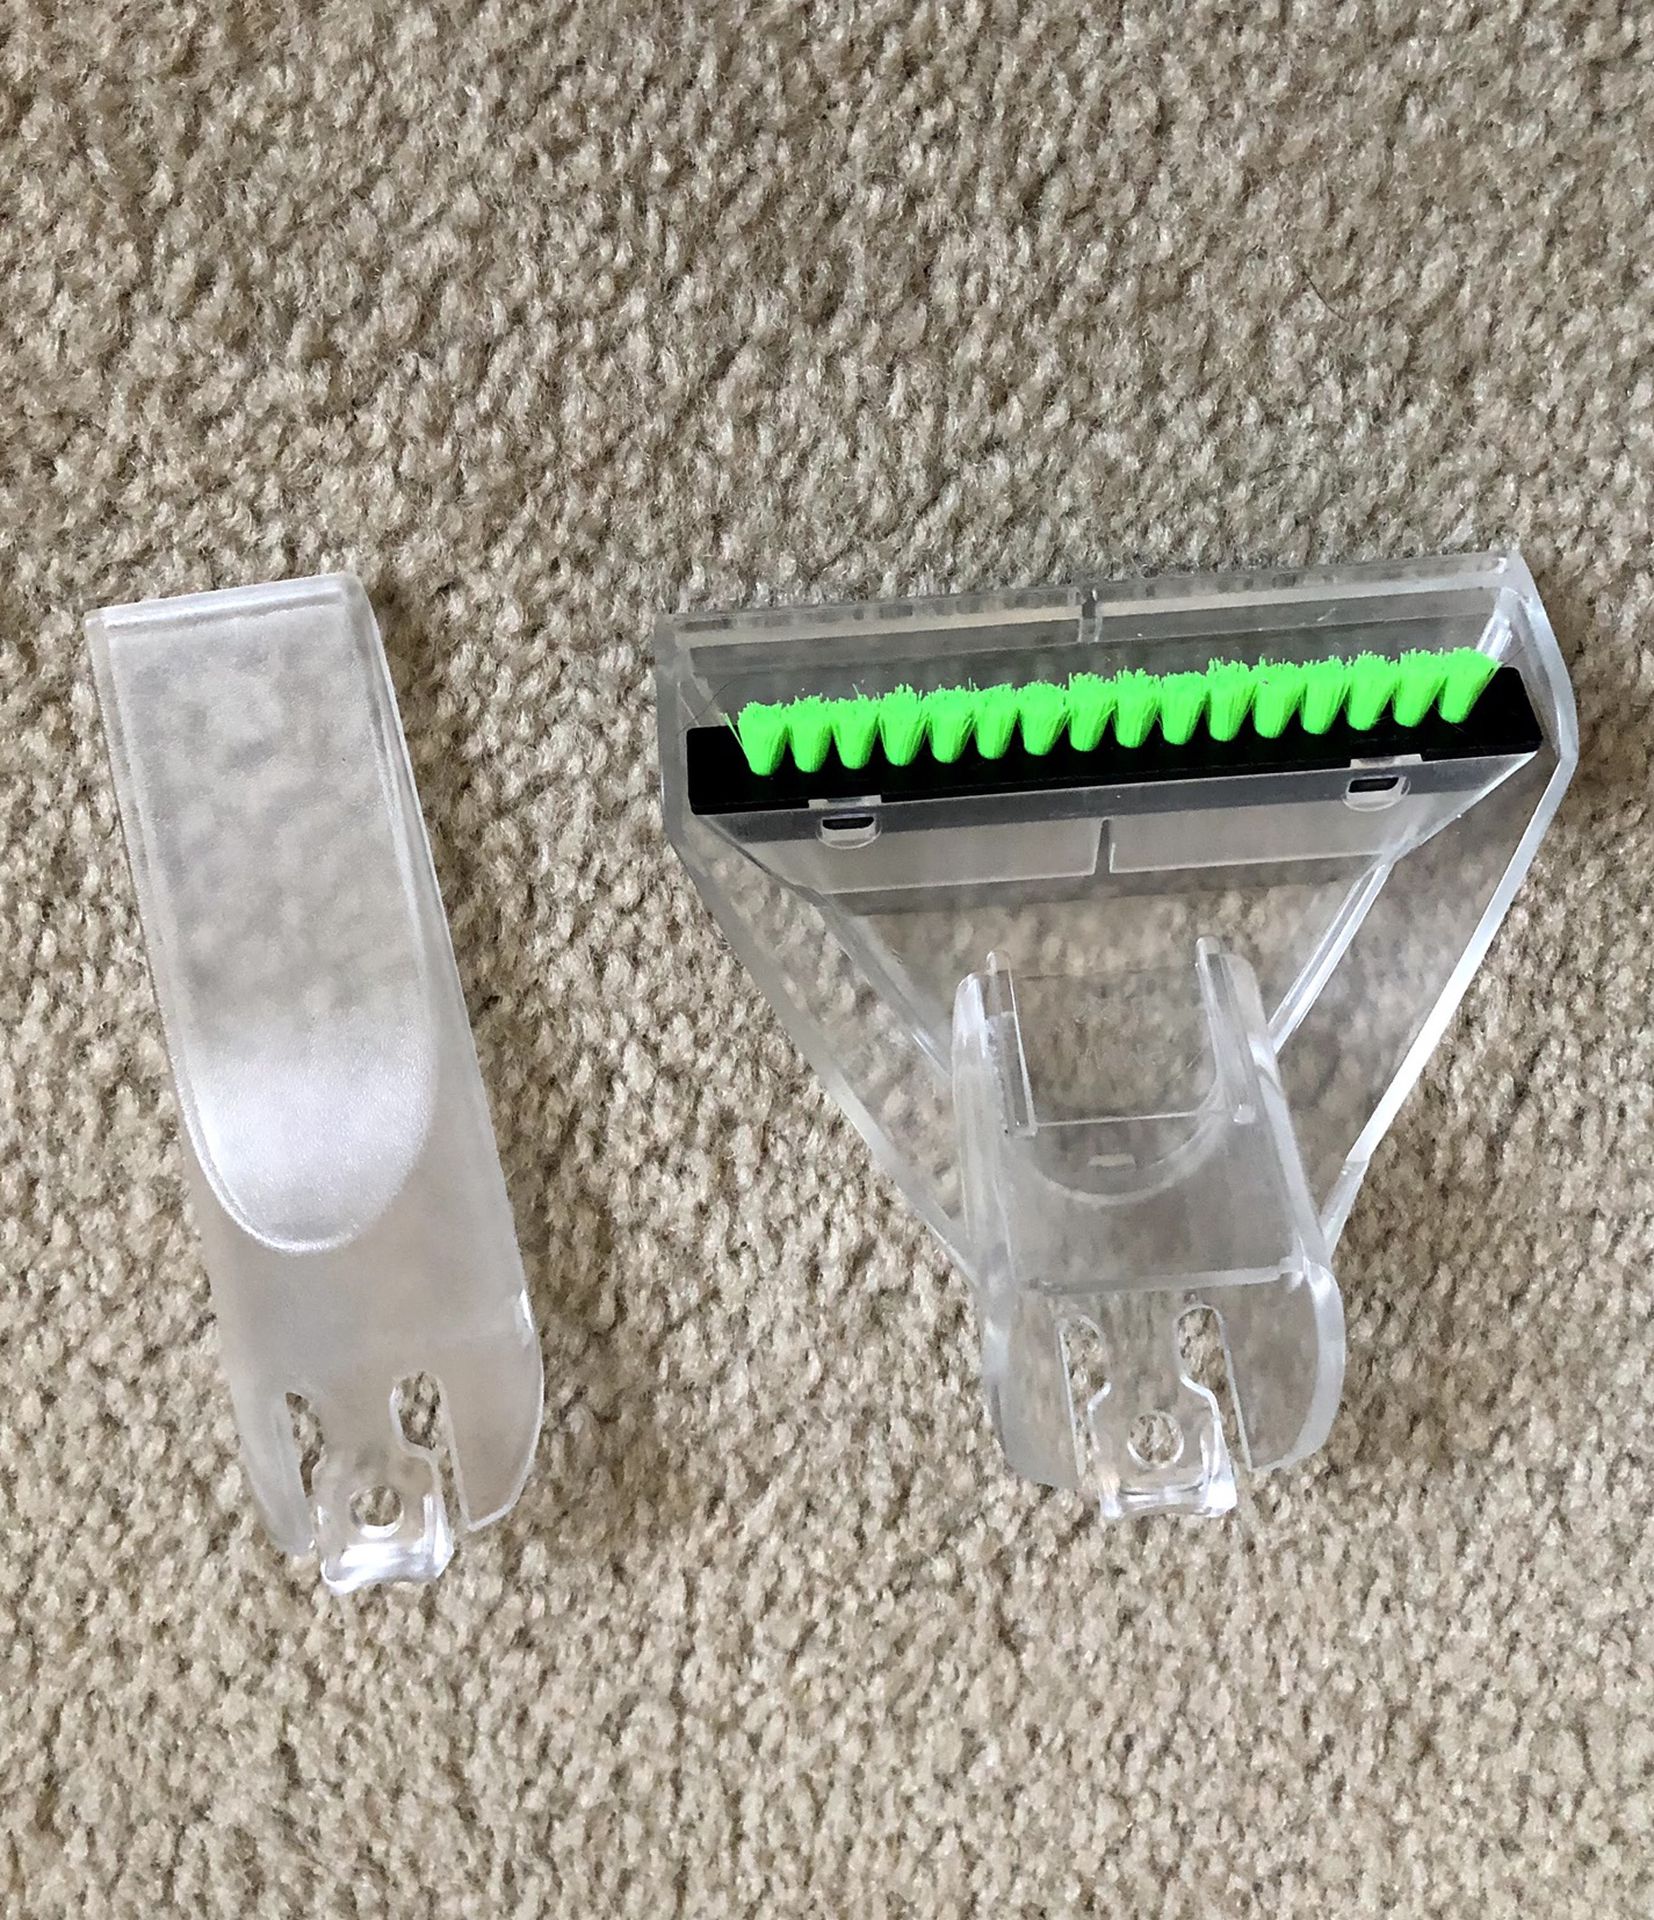 2 Hoover Carpet Cleaner Attachments